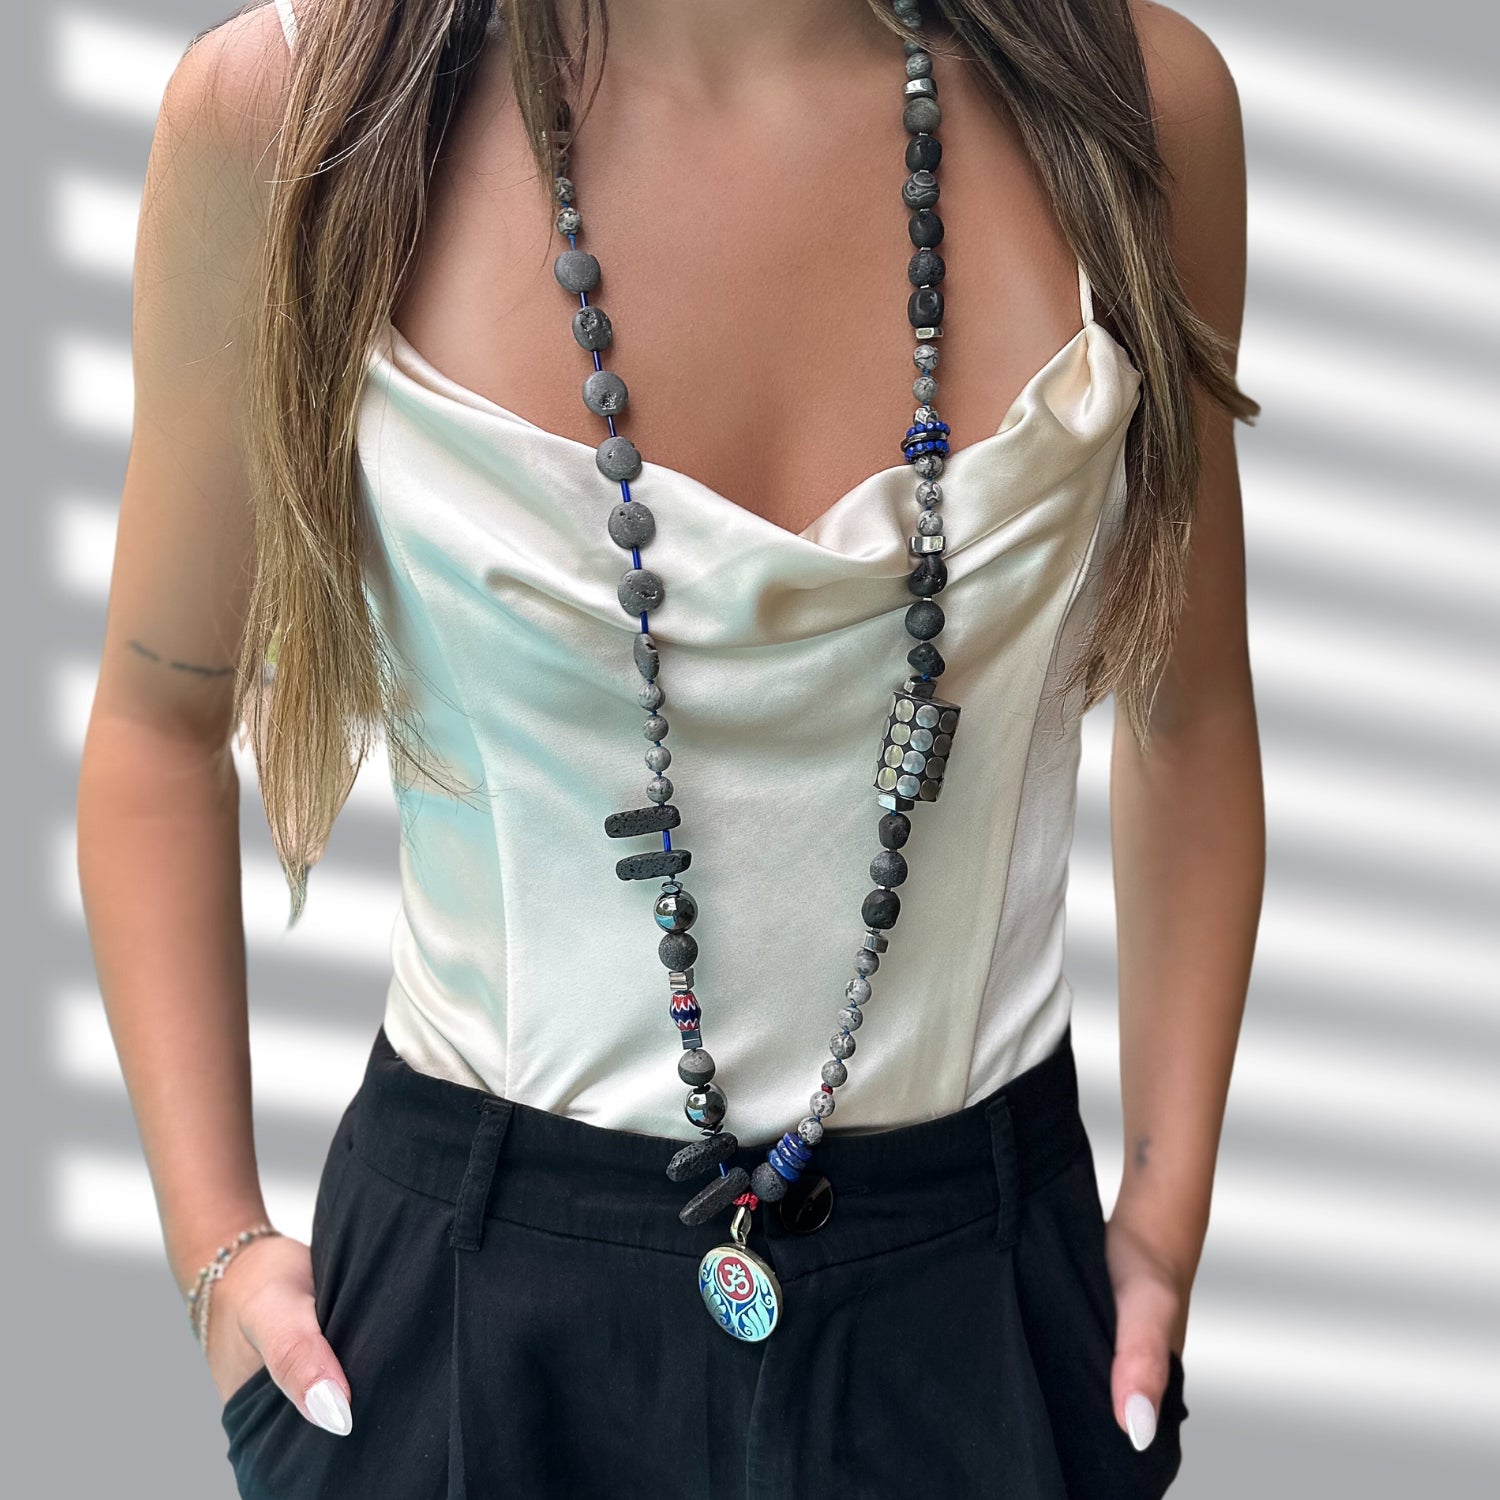 The model showcases the timeless elegance of the Tibetan Om Necklace, radiating a sense of inner peace and style.